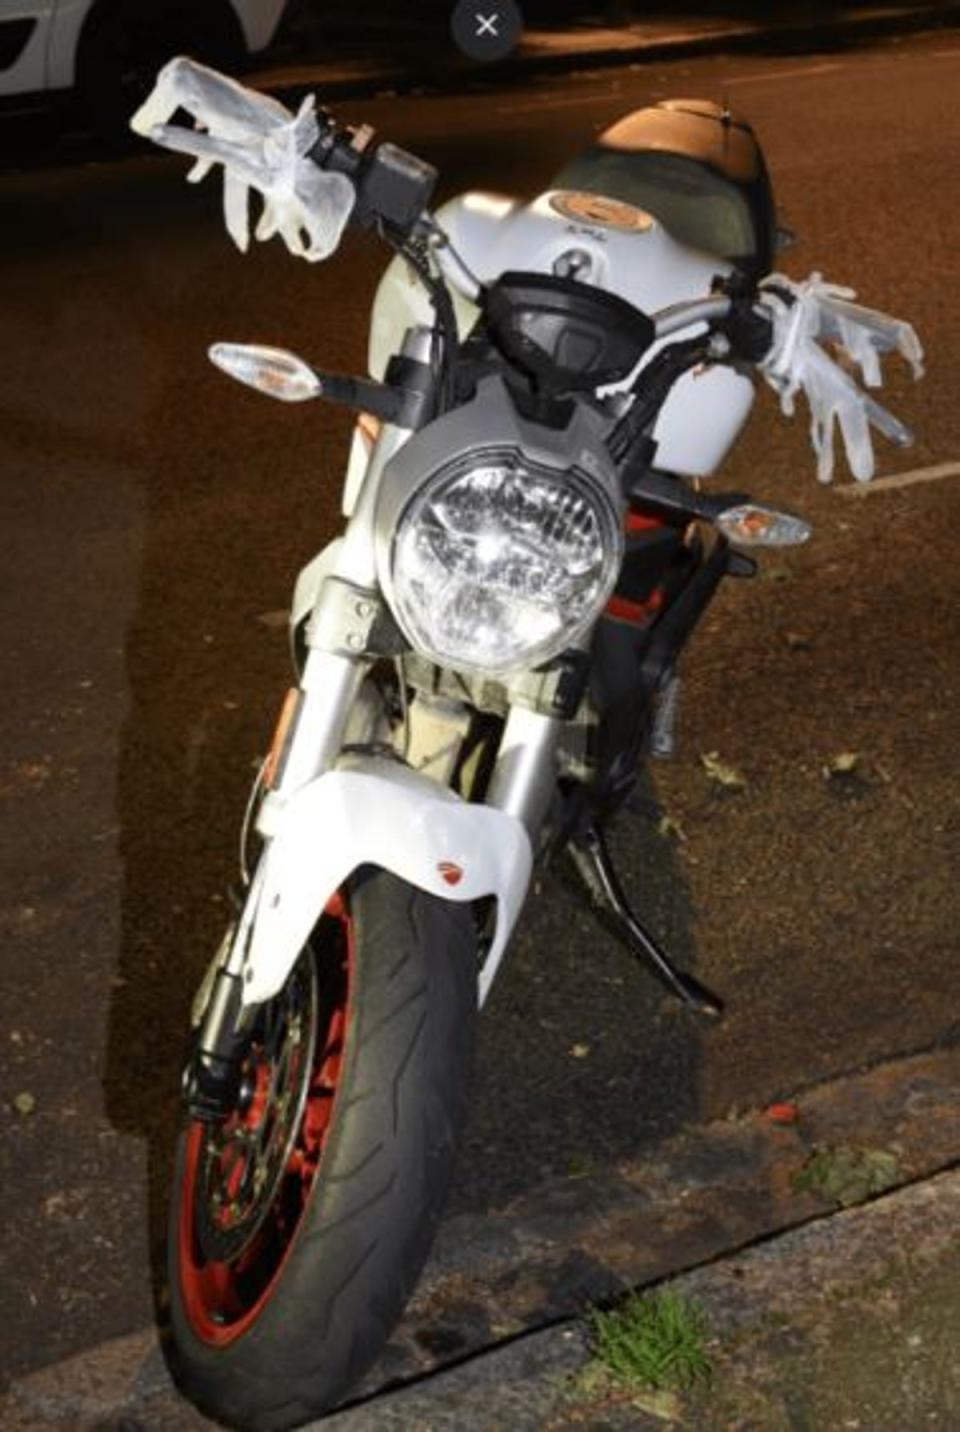 The stolen motorbike used in the attack was later found dumped at Colvestone Crescent (Met Police)